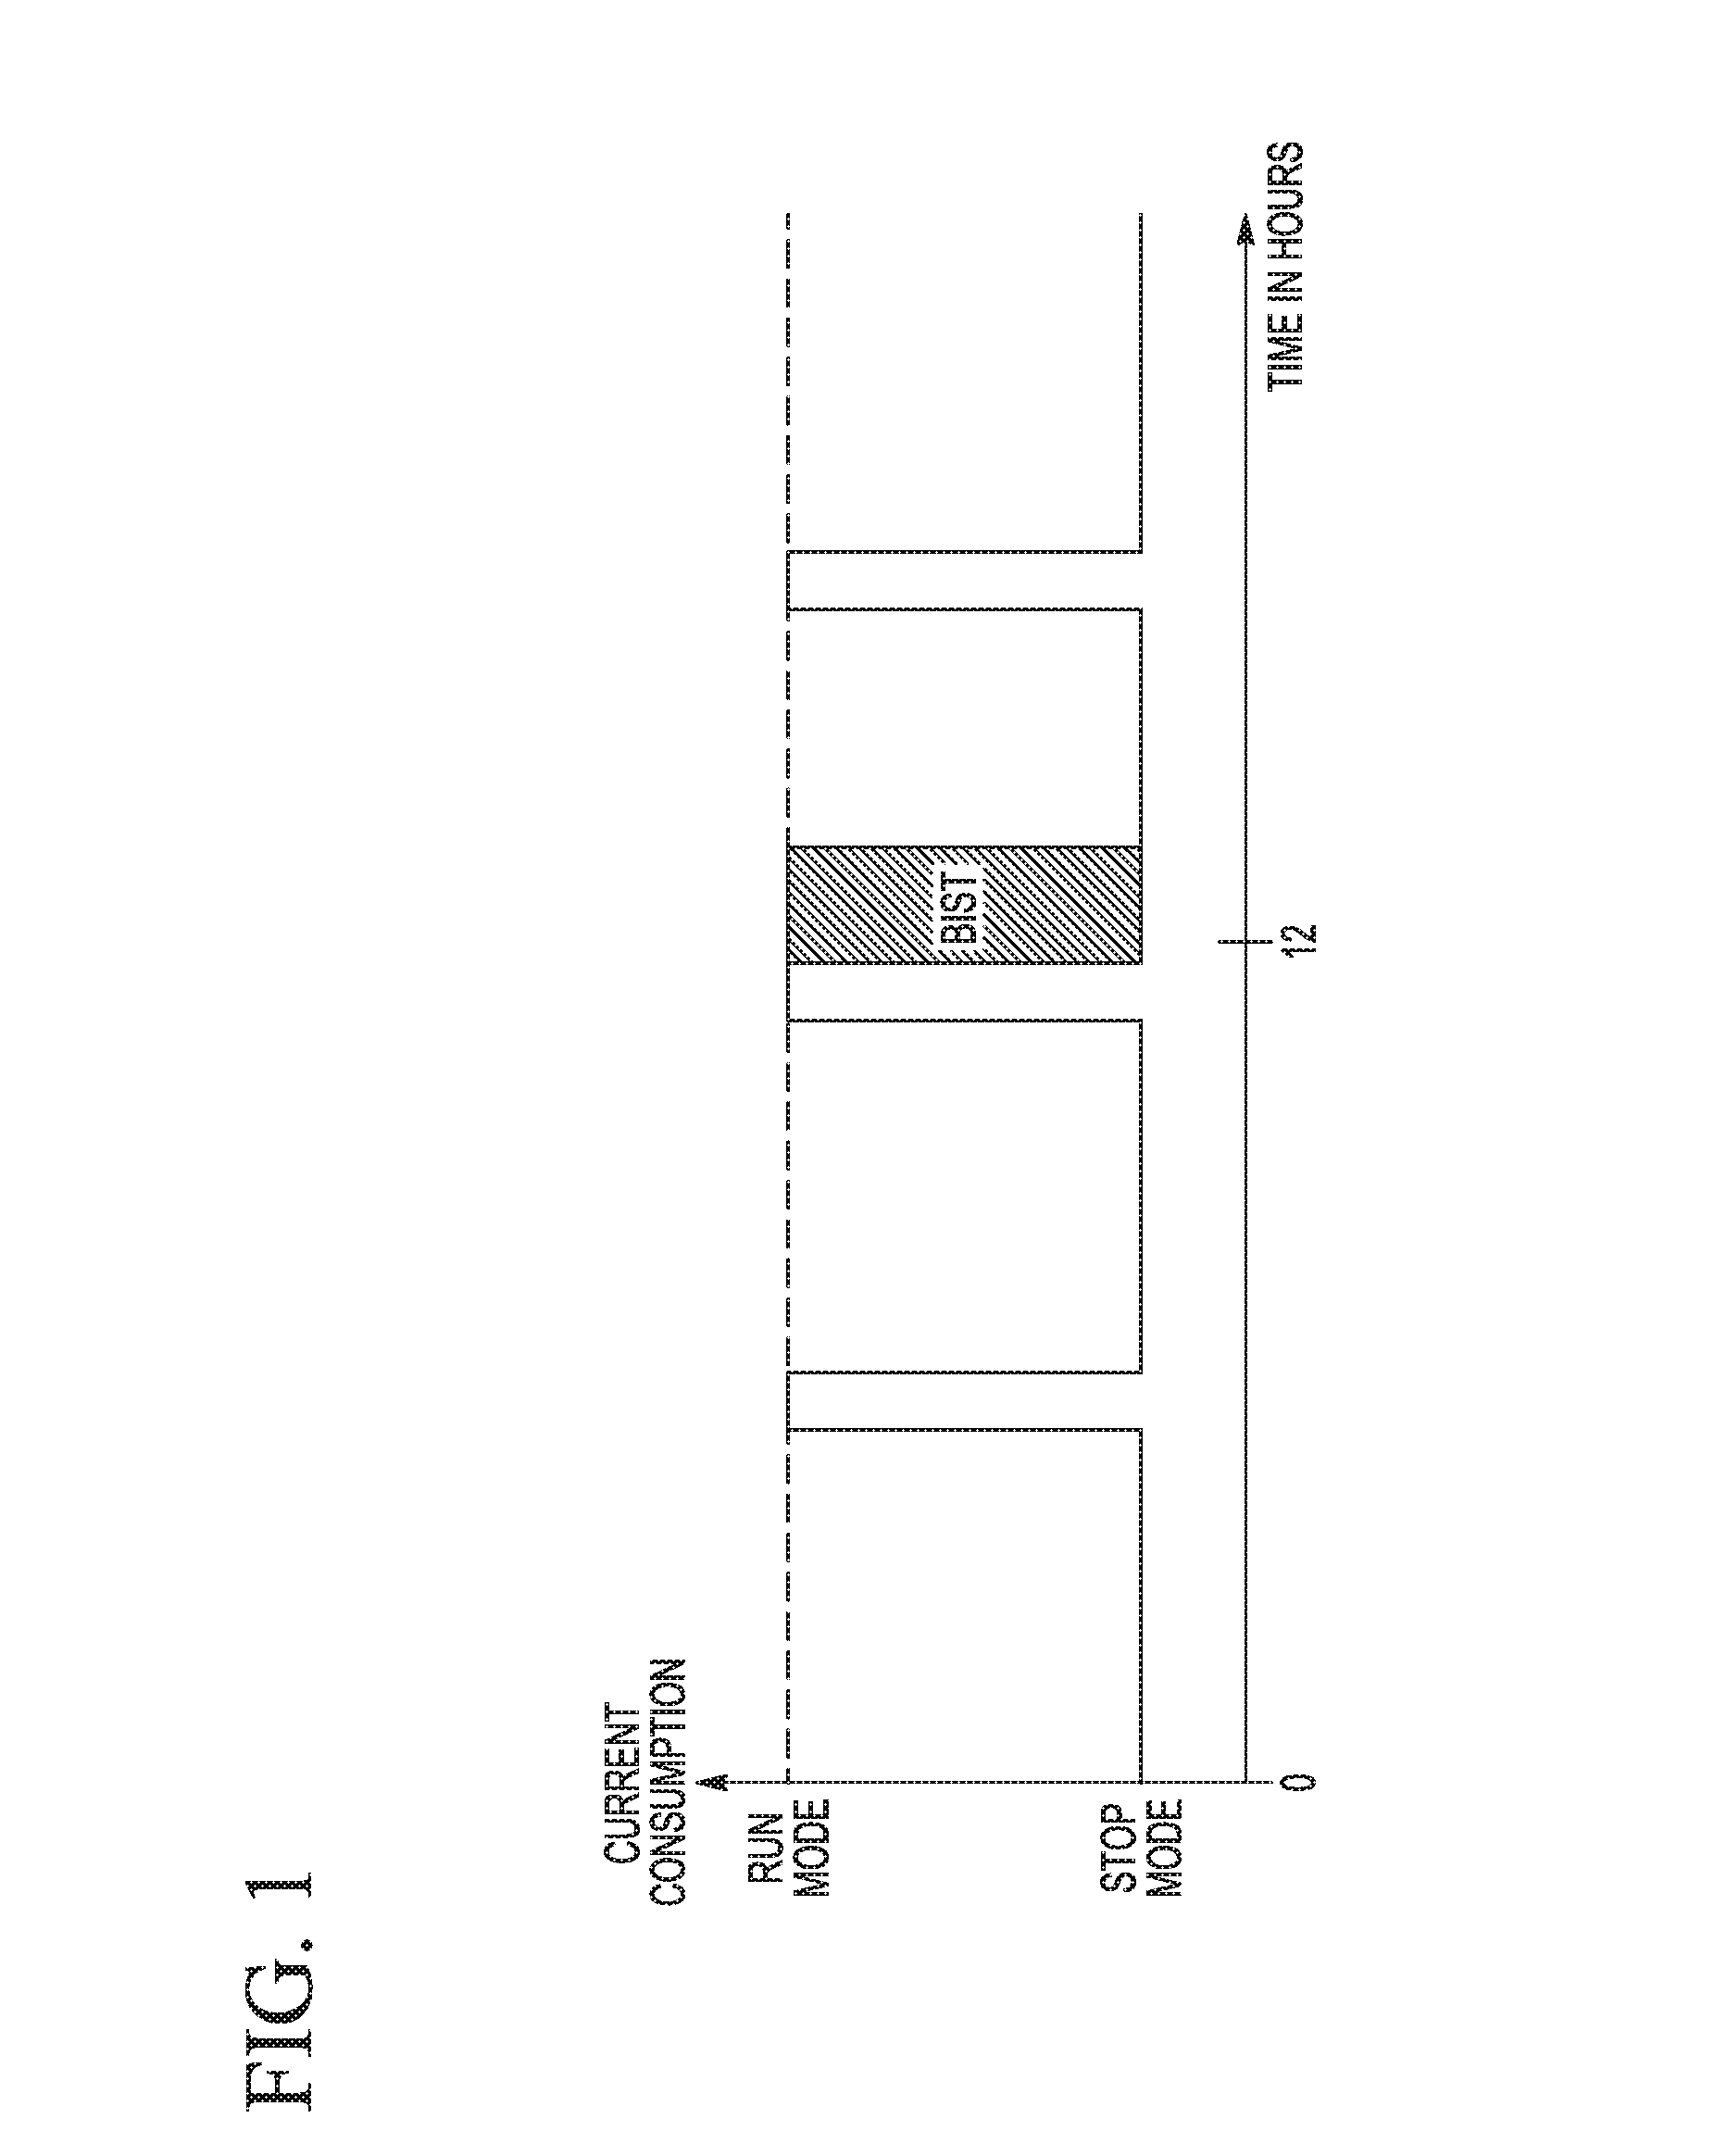 Data processing device and method of conducting a logic test in a data processing device